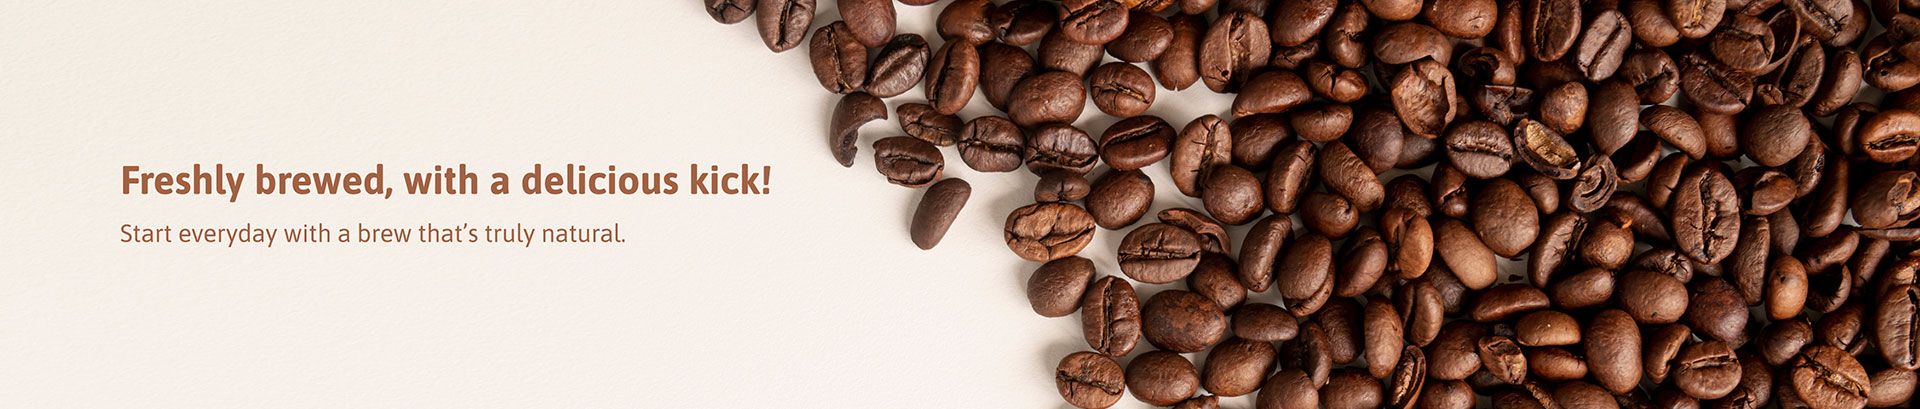 Food for thought - Beverages - Coffee Banner